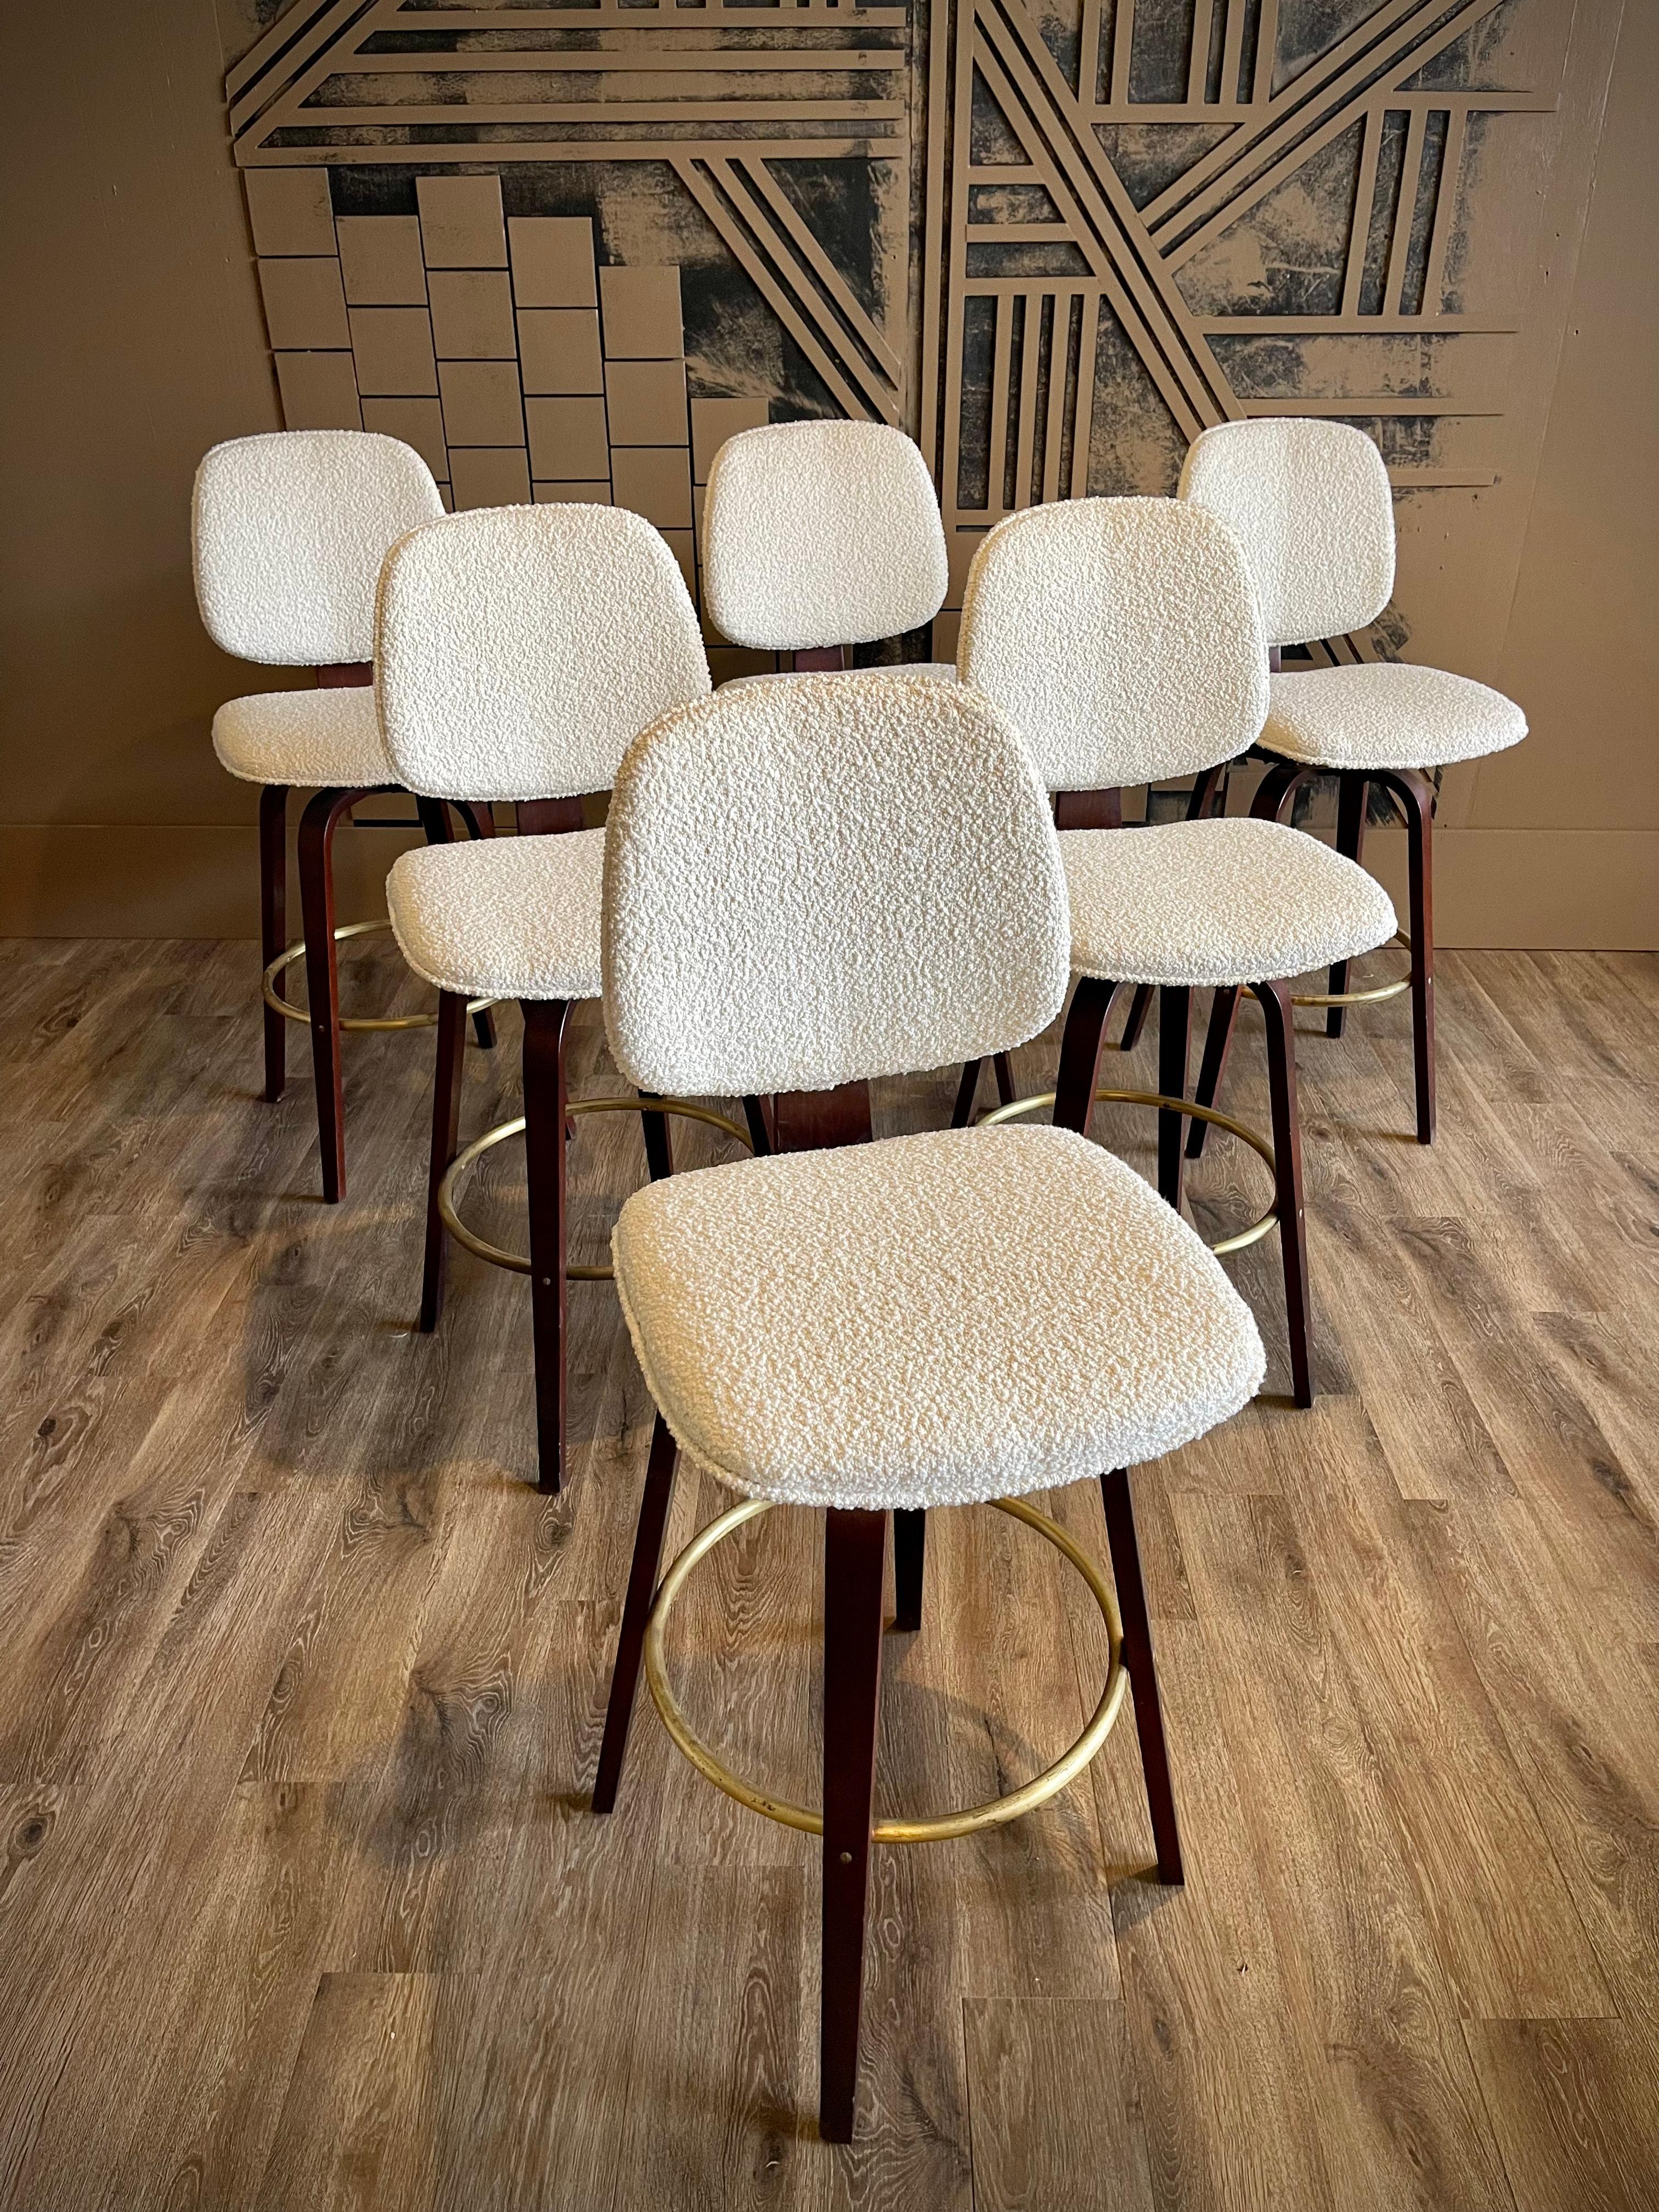 Introducing a stunning set of six Thonet swivel barstools, wonderfully maintained and boasting sleek walnut construction and brass foot rail accents. Revitalized with creamy off-white boucle upholstery, these barstools exude both luxury and comfort.